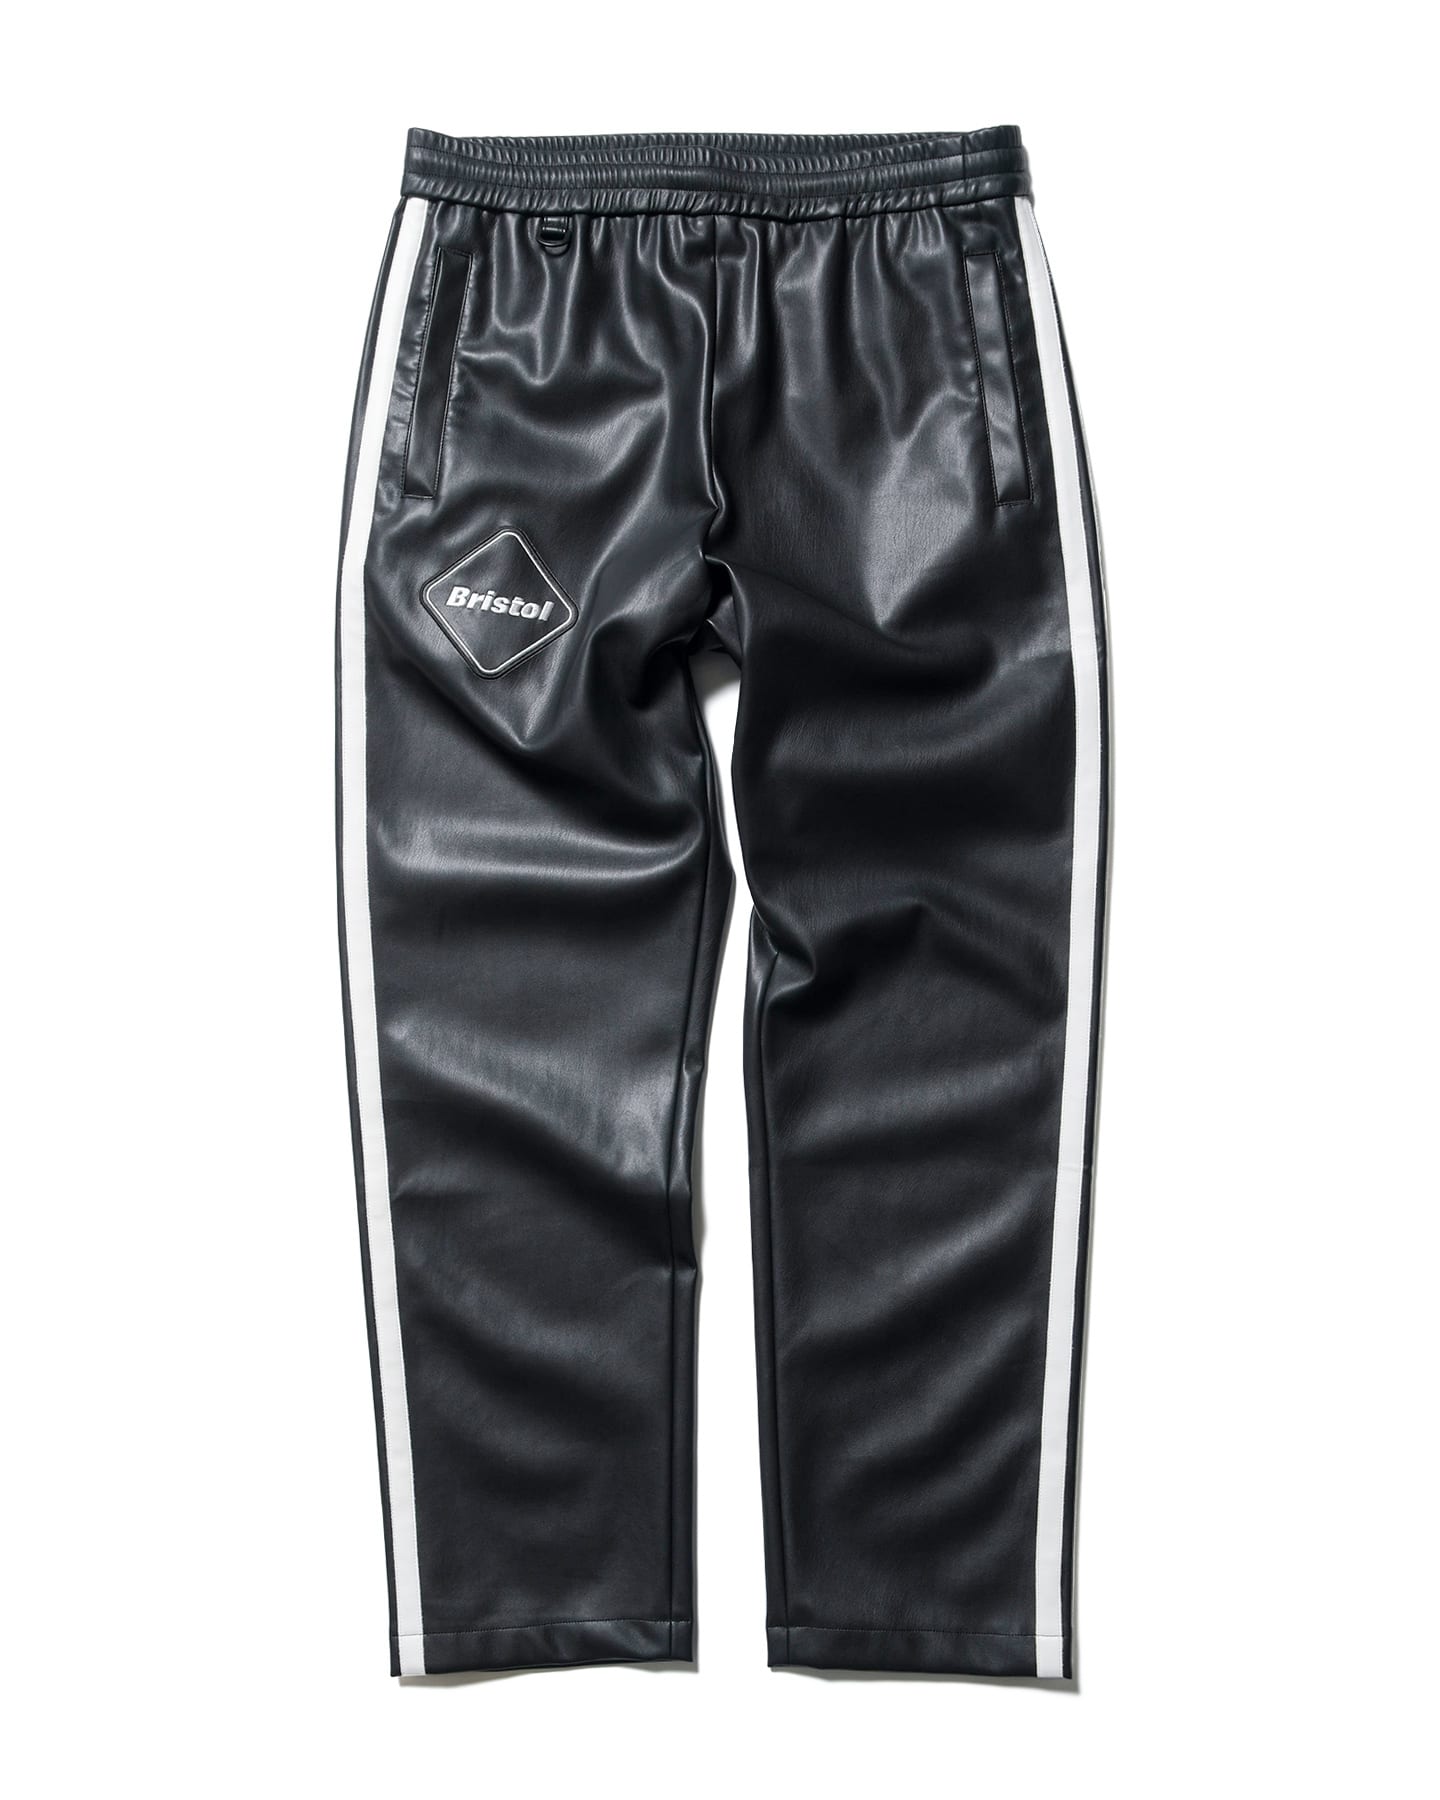 SOPH. | SYNTHETIC LEATHER PANTS(M BLACK):